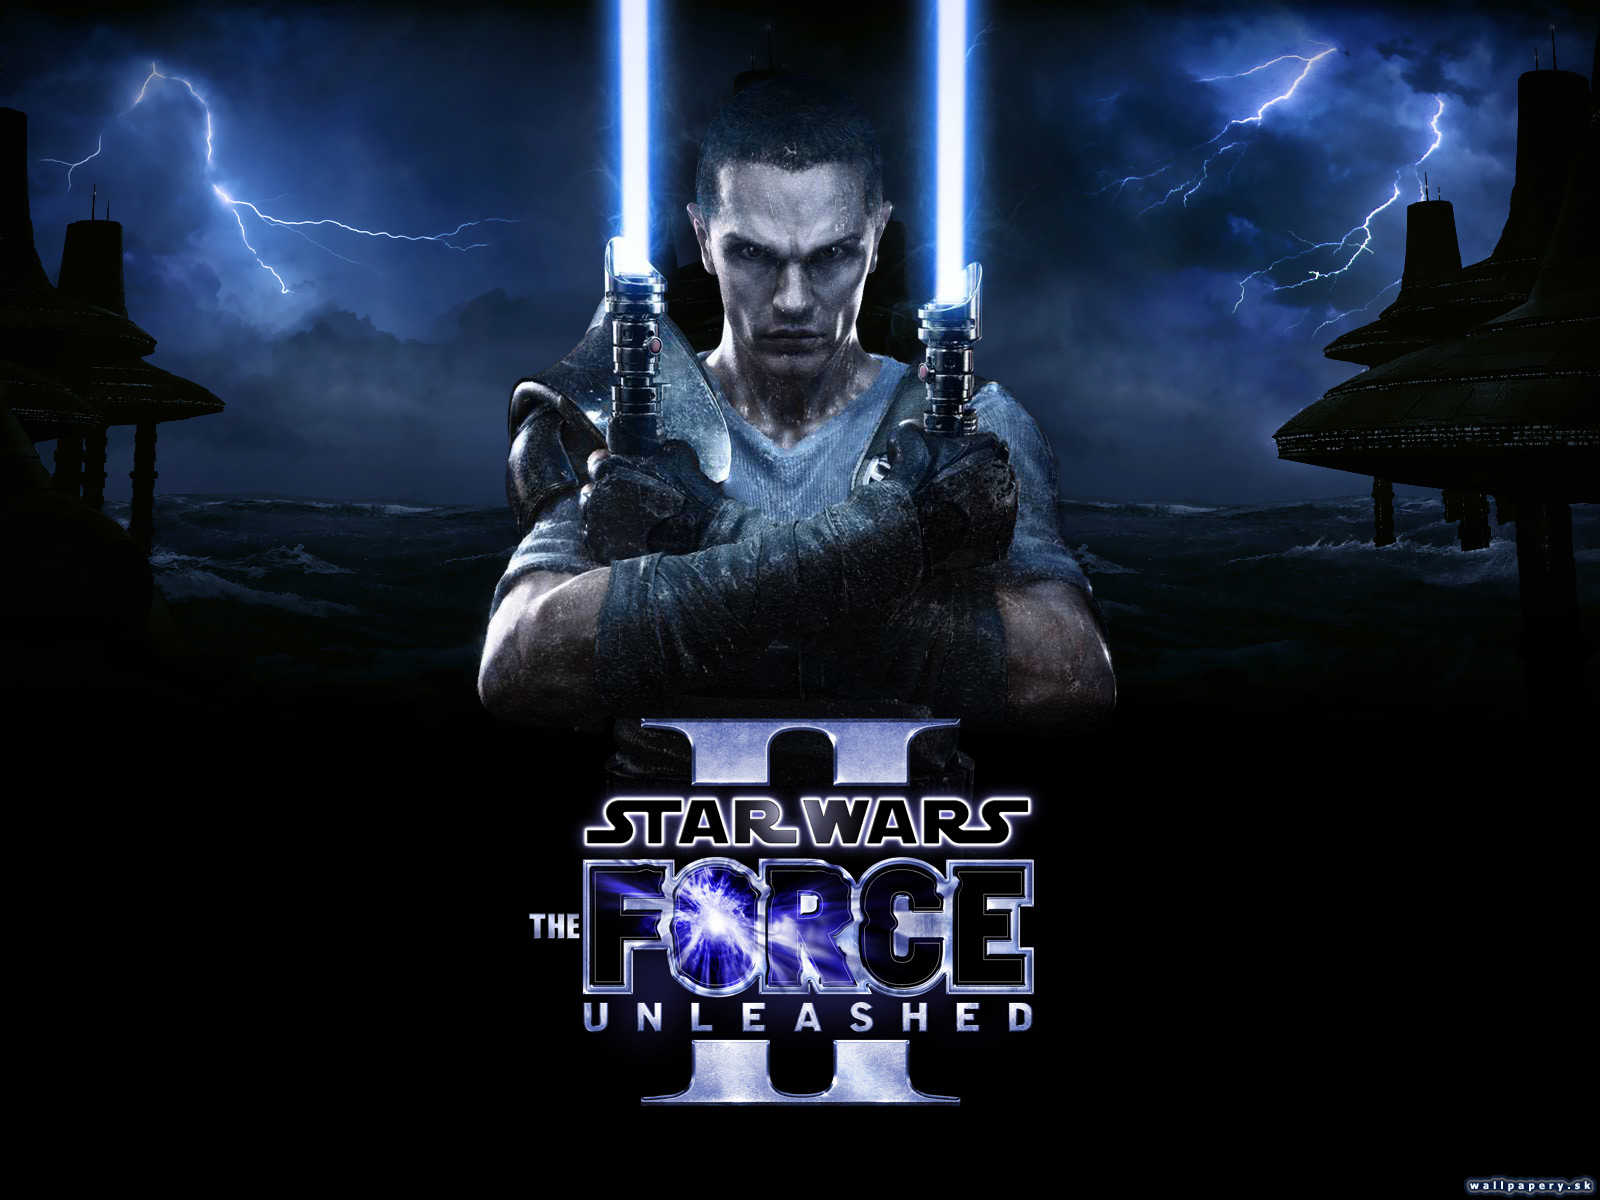 Star Wars: The Force Unleashed 2 - wallpaper 3